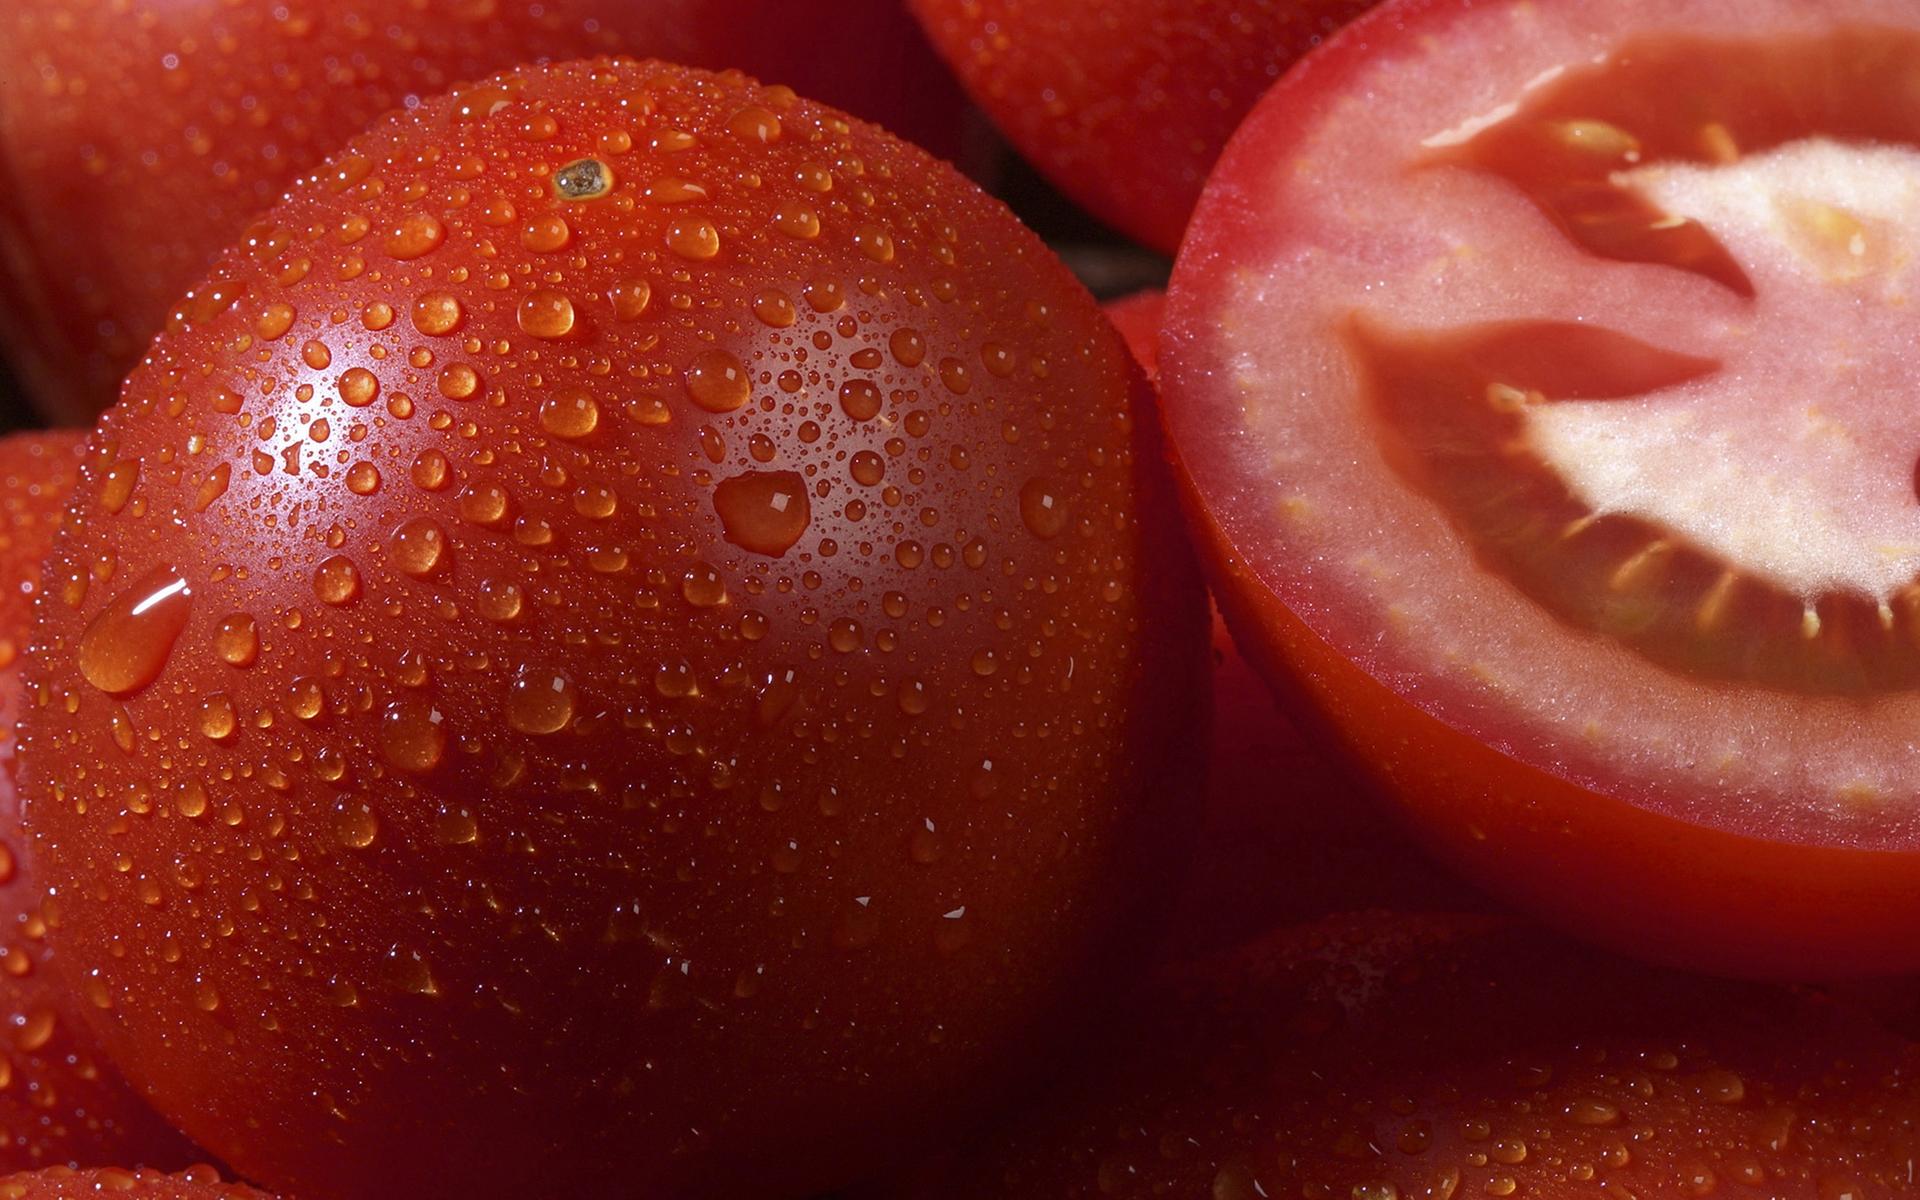 wallpapers for desktop, photo, Tomatoes